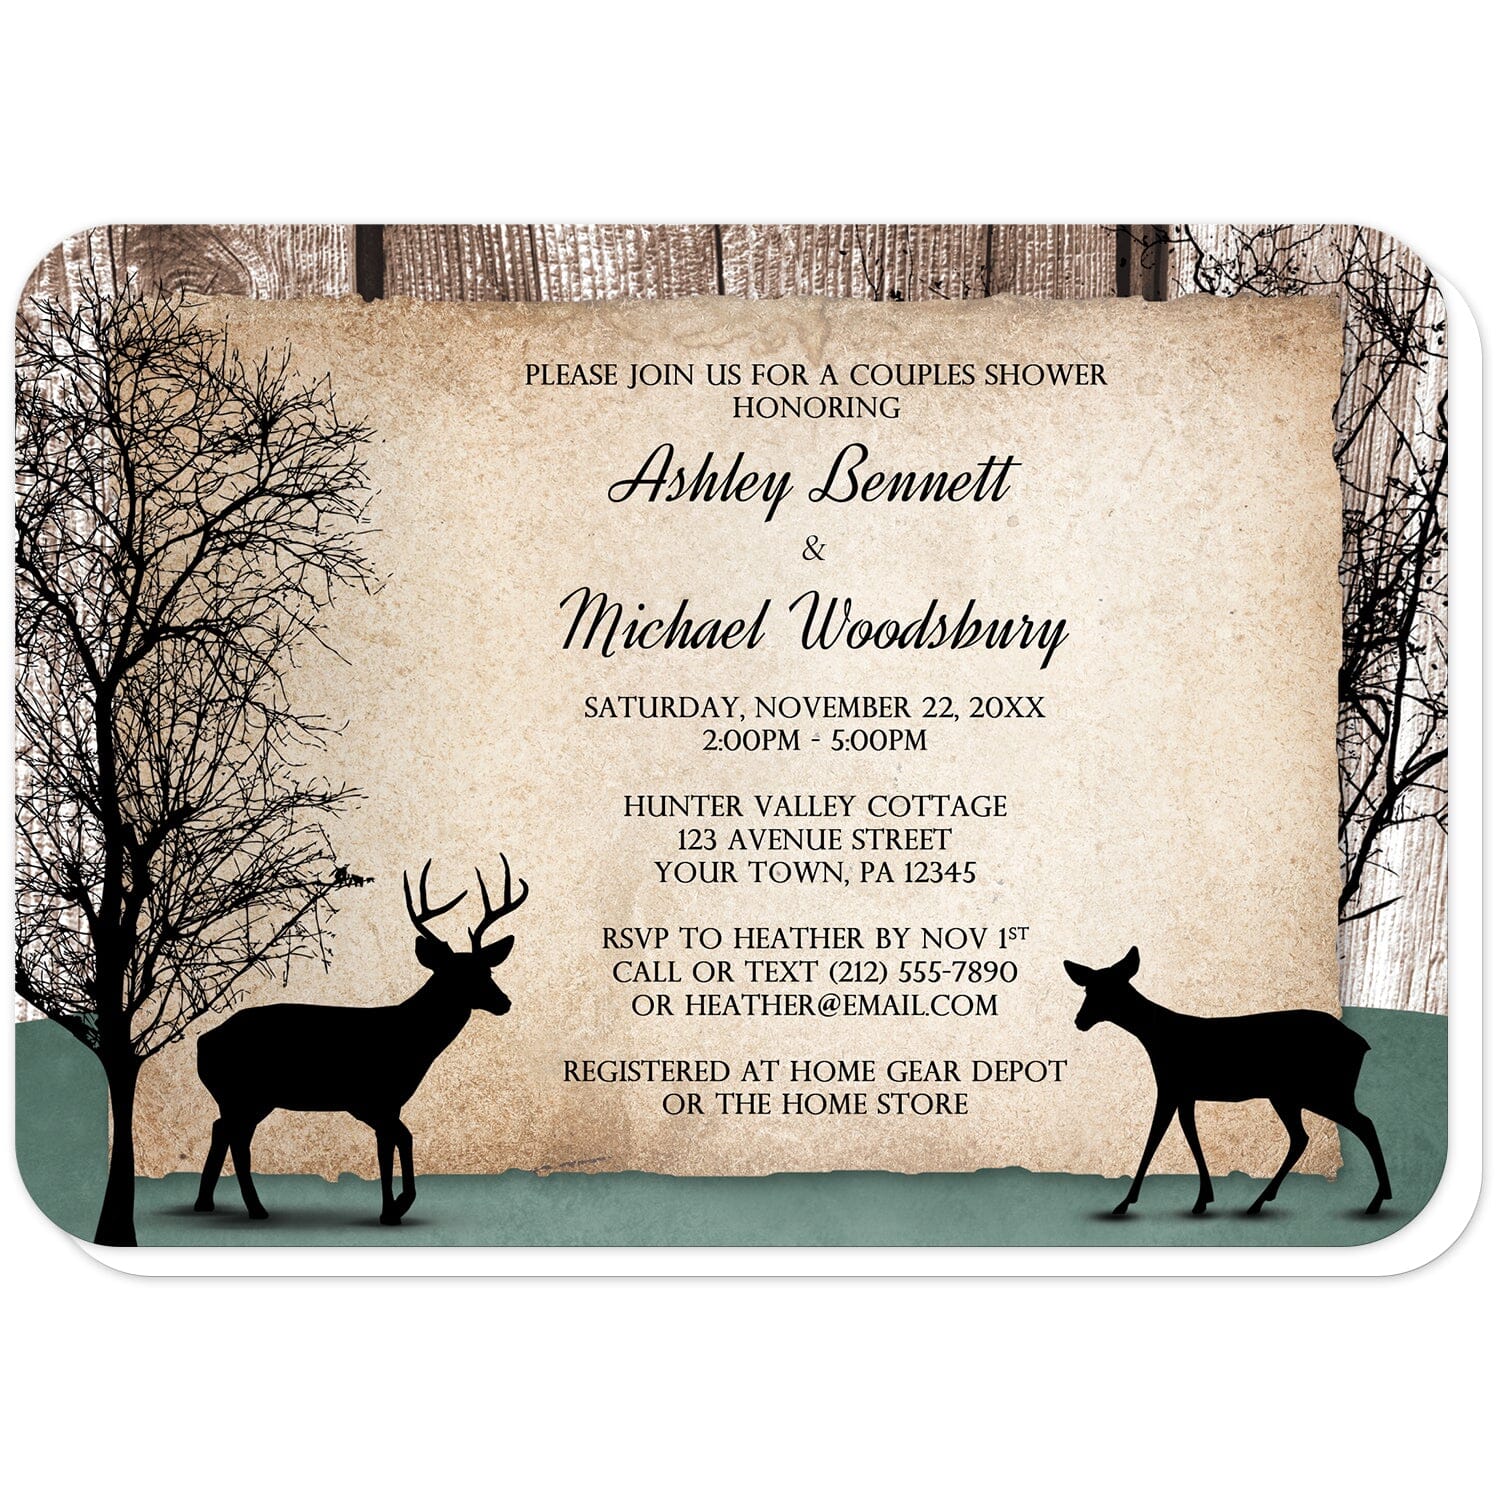 Rustic Woodsy Deer Couples Shower Invitations (with rounded corners) at Artistically Invited. Rustic woodsy deer couples shower invitations designed with silhouettes of a buck deer with antlers, a doe, and winter trees over a wood brown background and a faded hunter green design along the bottom. Your personalized couples shower celebration details are custom printed in black over a tattered rustic paper illustration between the deer.